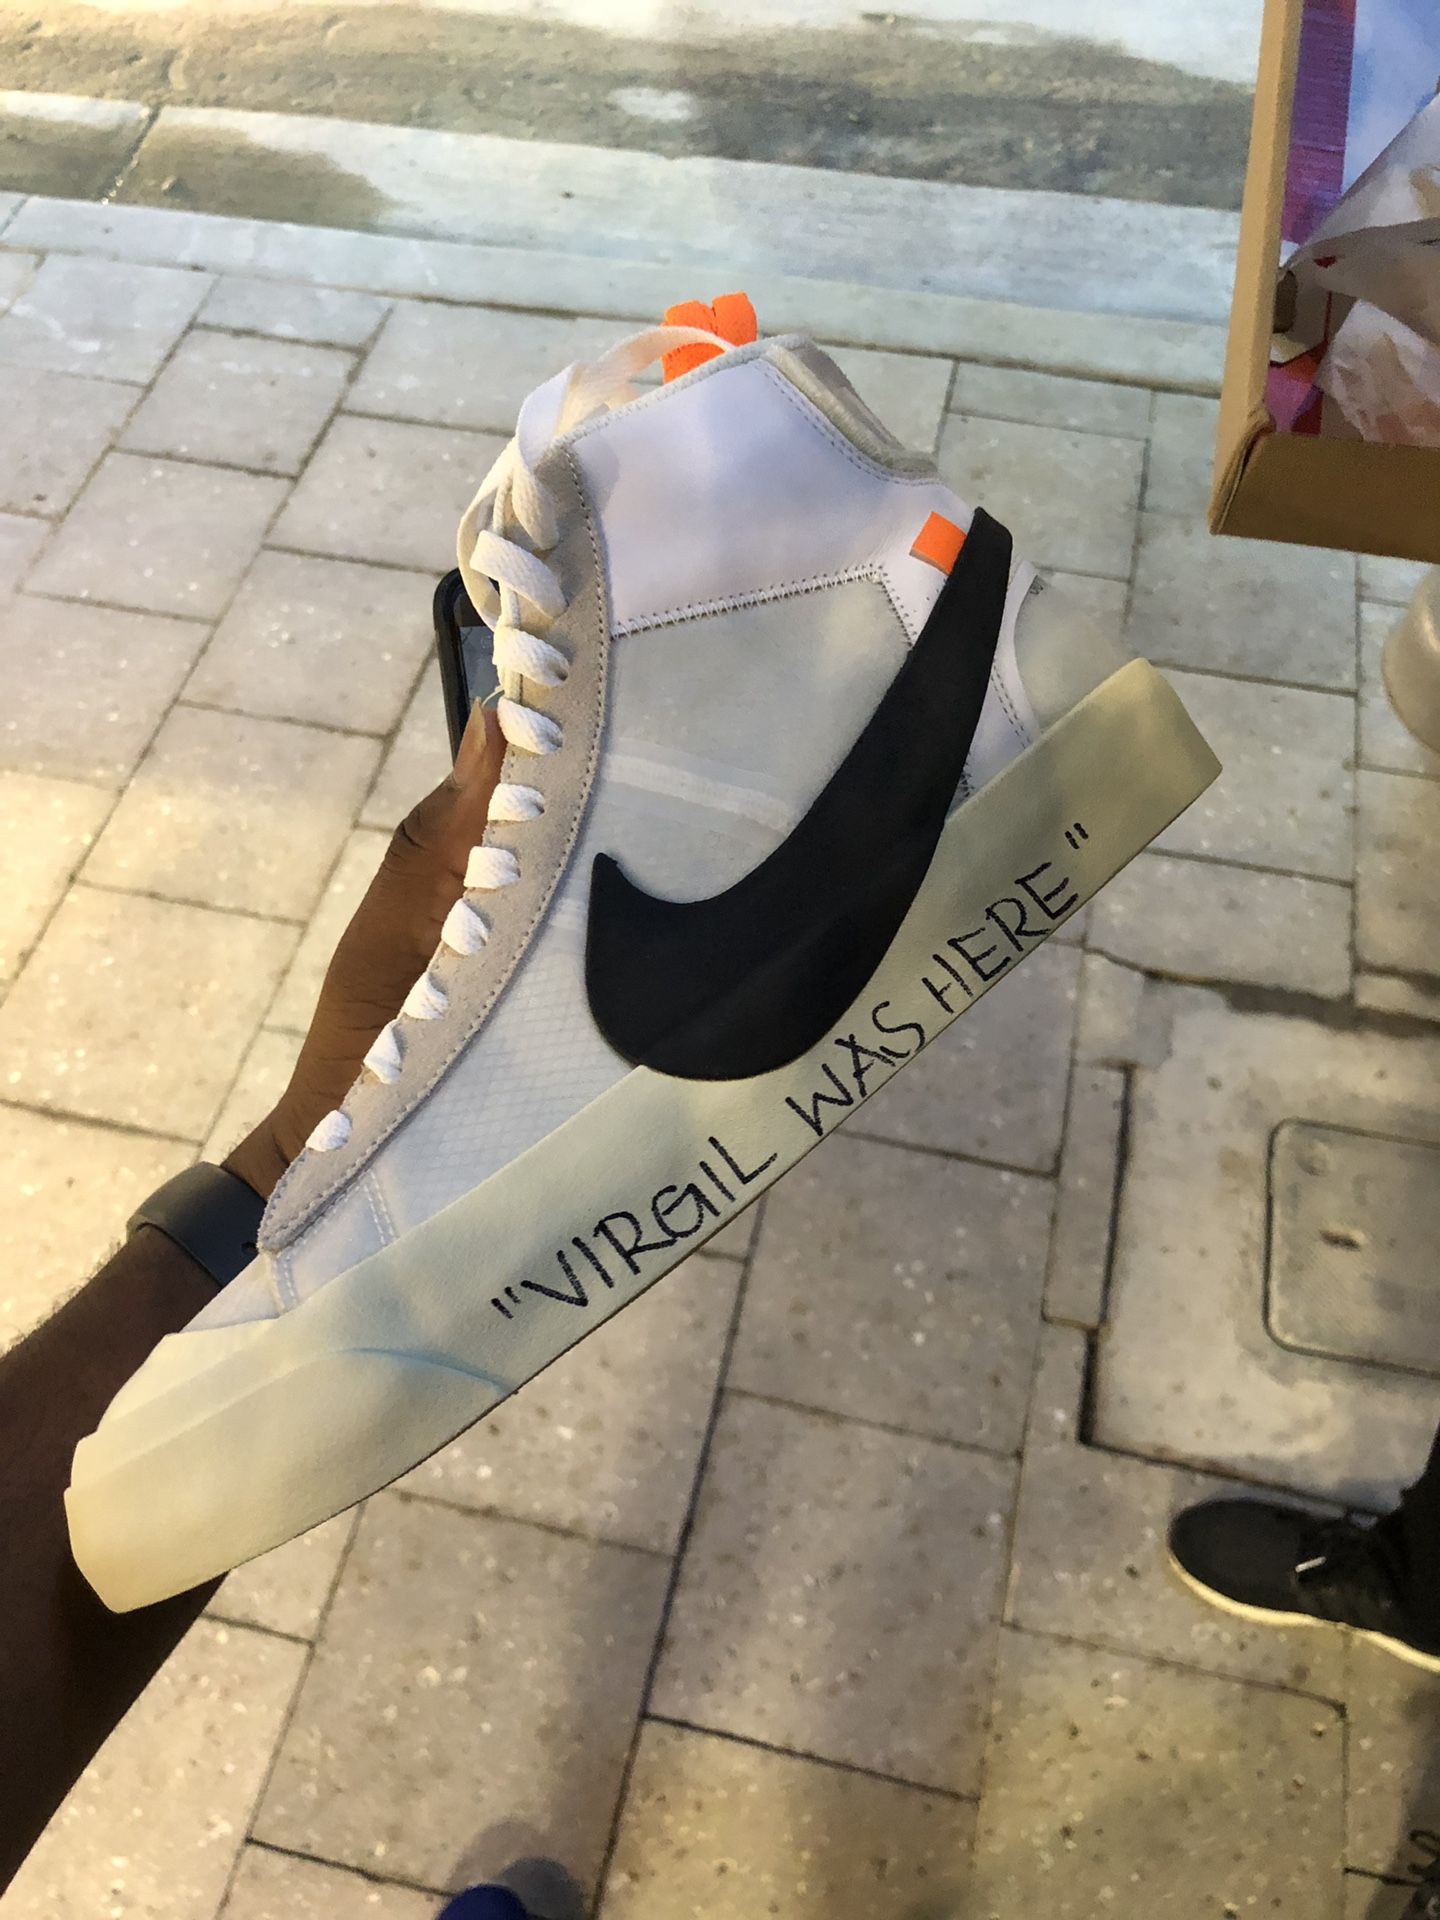 OFF WHITE AIR JORDAN 1 REVIEW (Signed By VIRGIL ABLOH) 